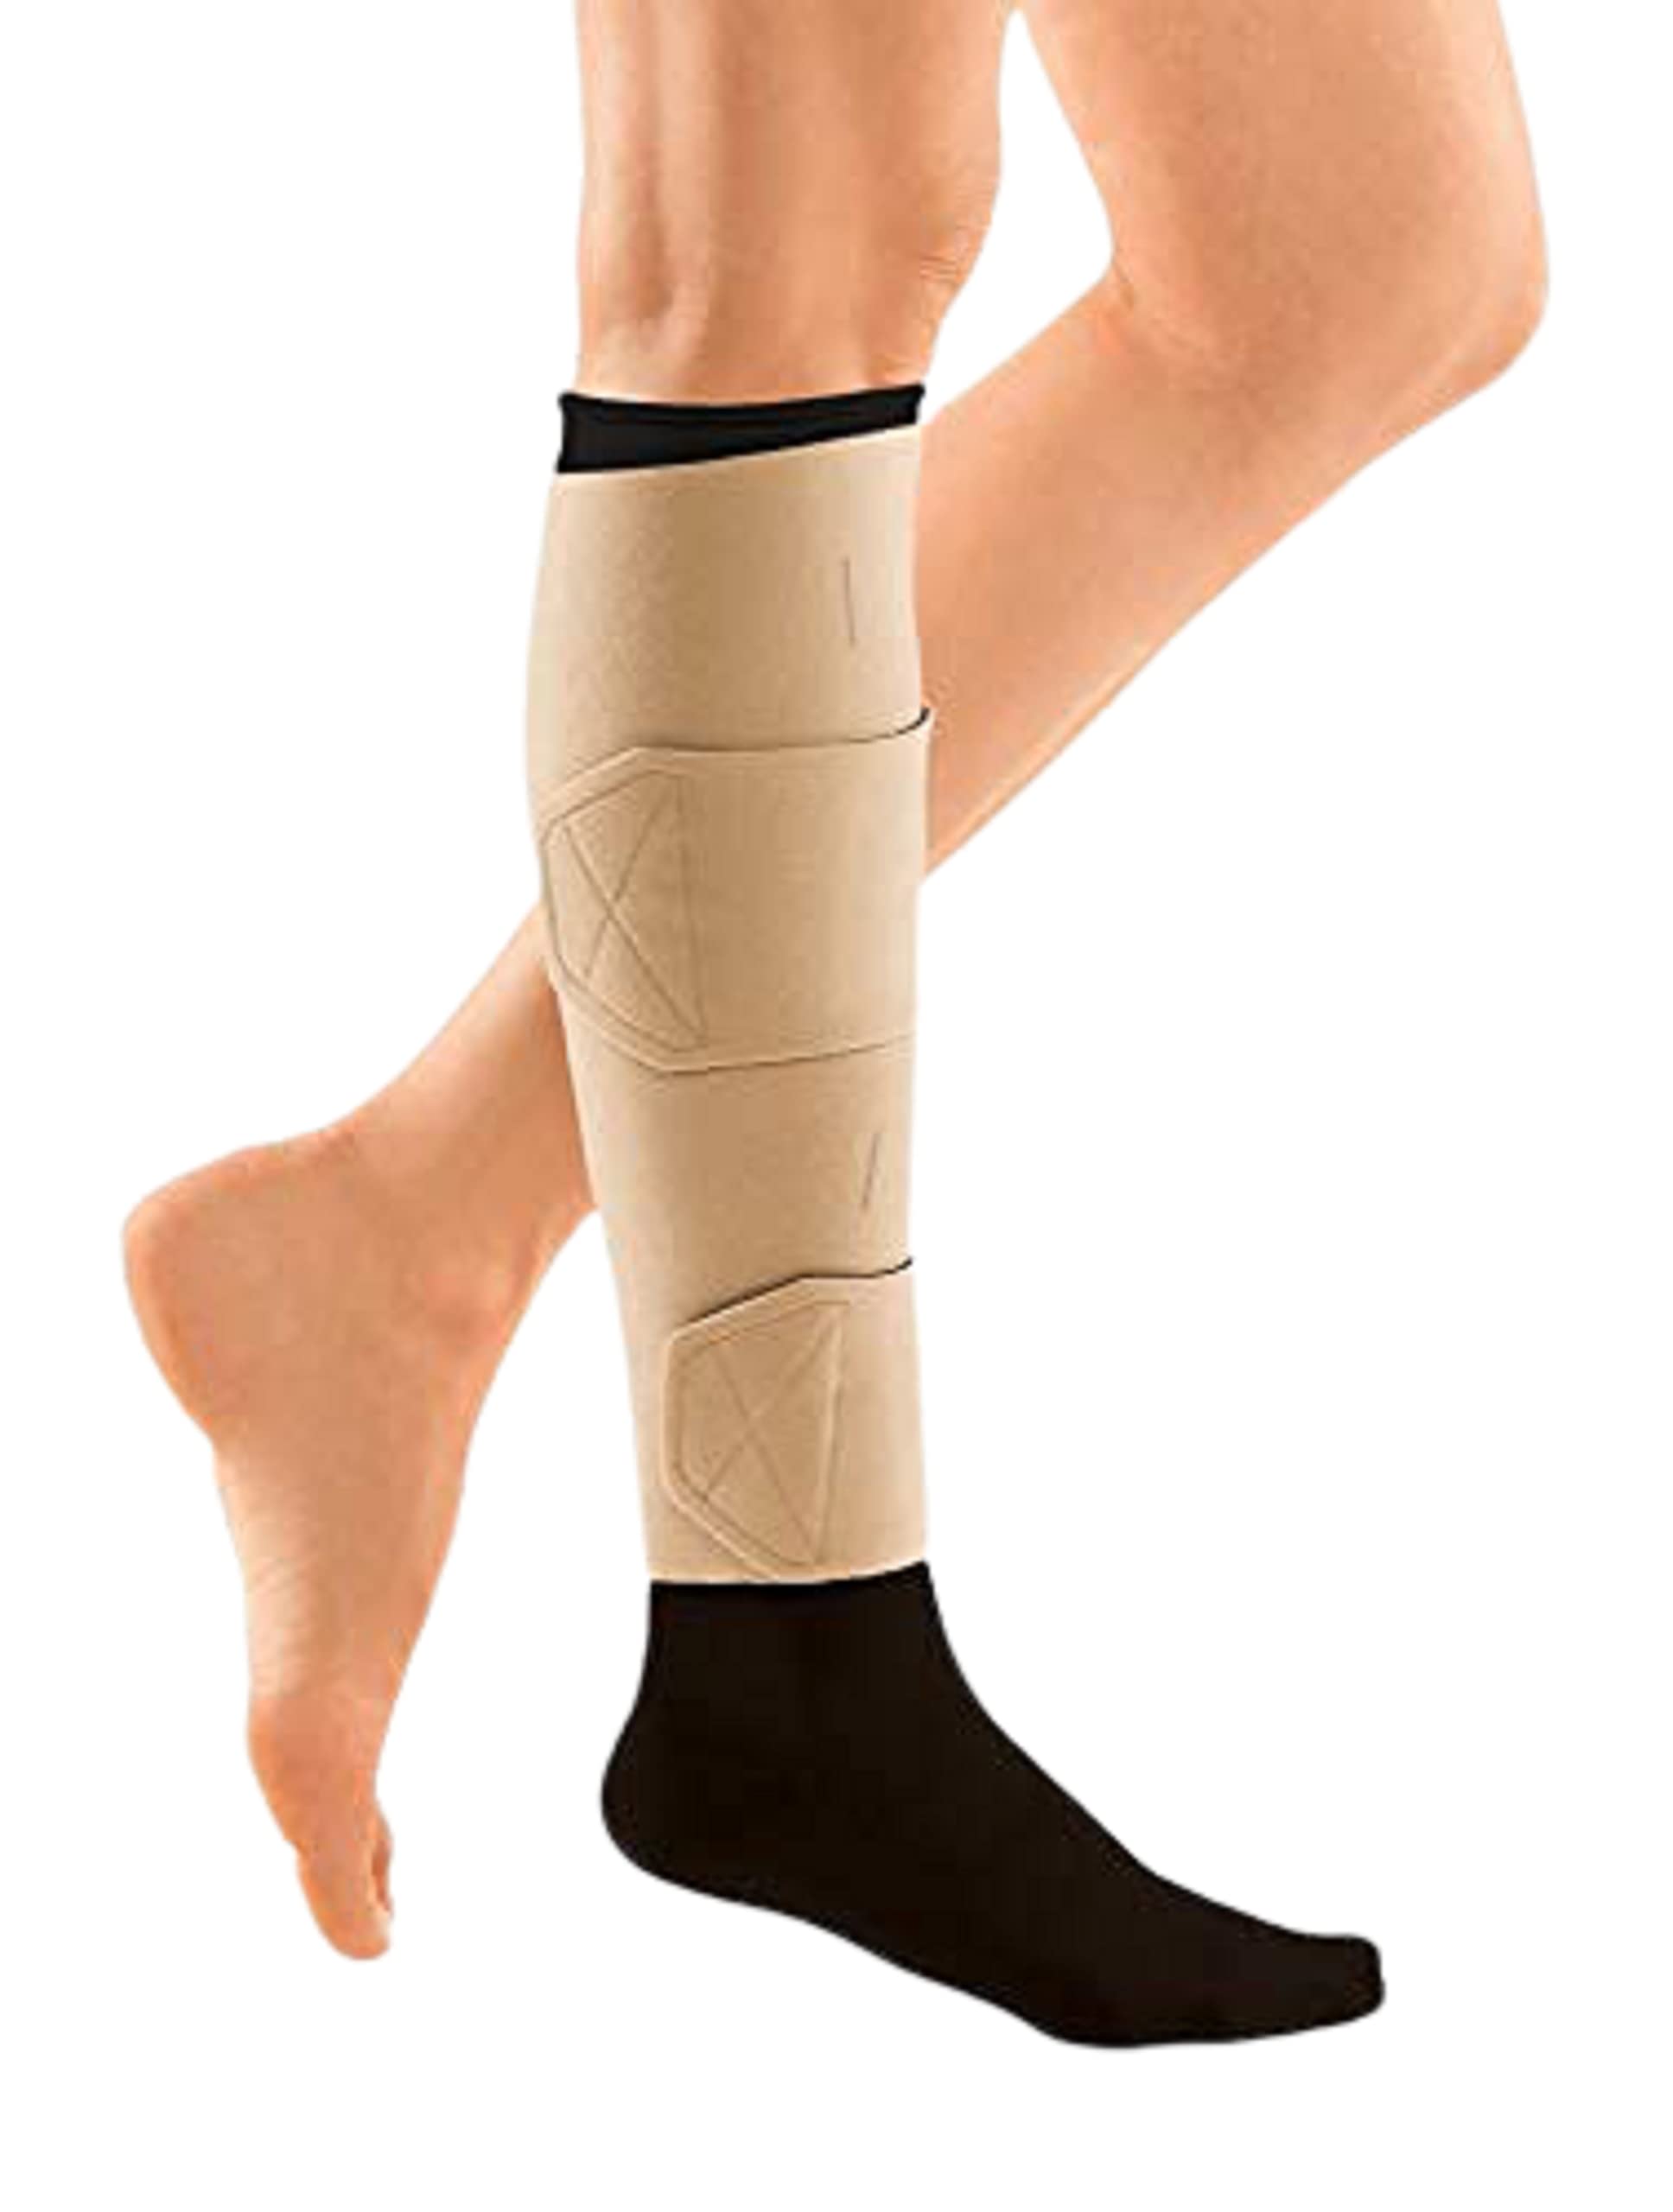 circaid Juxtalite Lower Leg System Designed for Compression and Easy Use Small Short